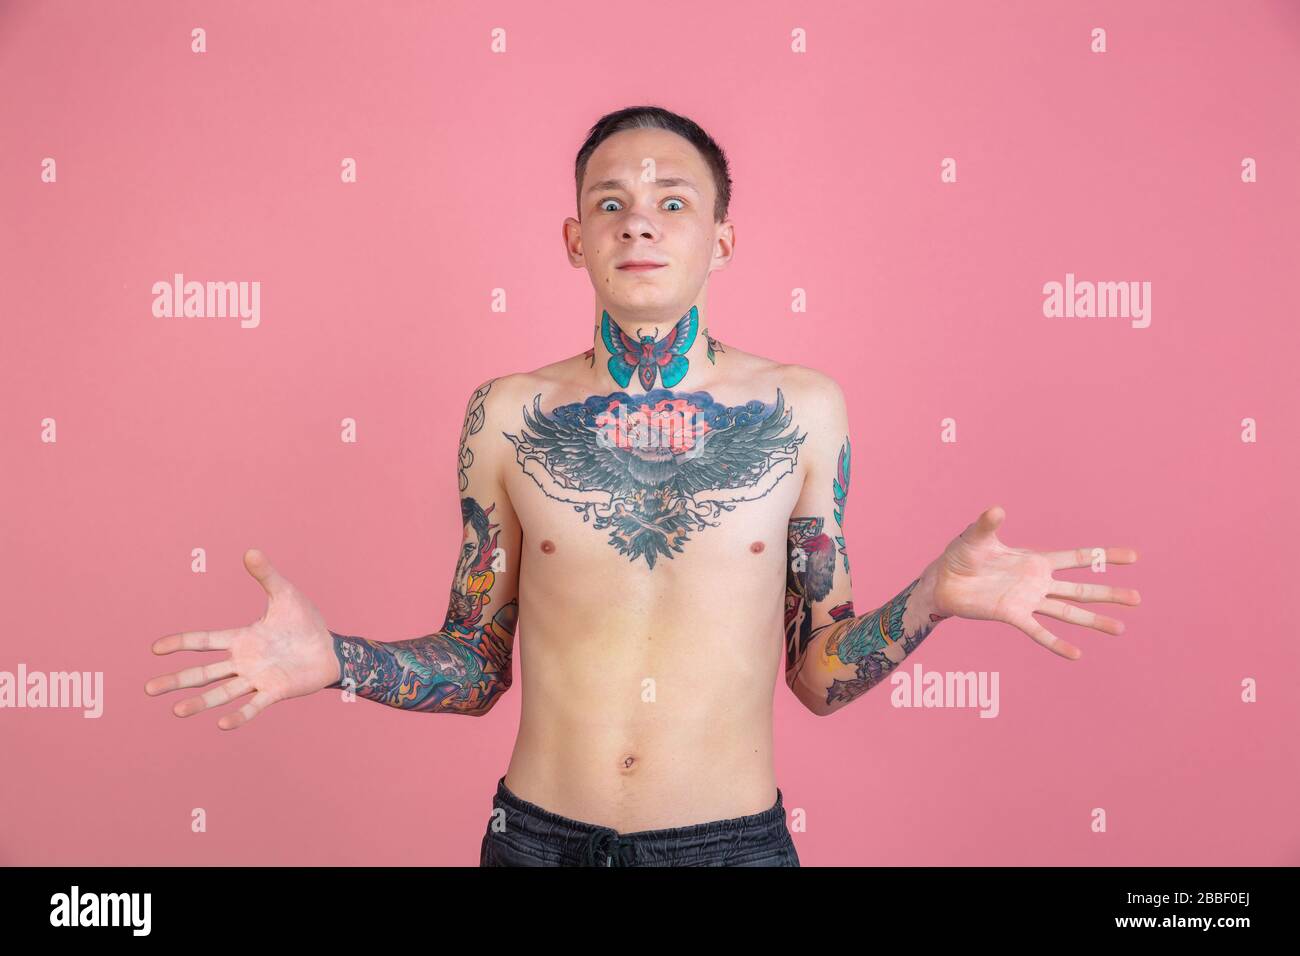 Uncertain. Portrait of young man with freaky appearance on pink background. Unusual look with huge tattooes. Doing daily routine. Human emotions, facial expression, sales, ad concept. Youth culture. Stock Photo